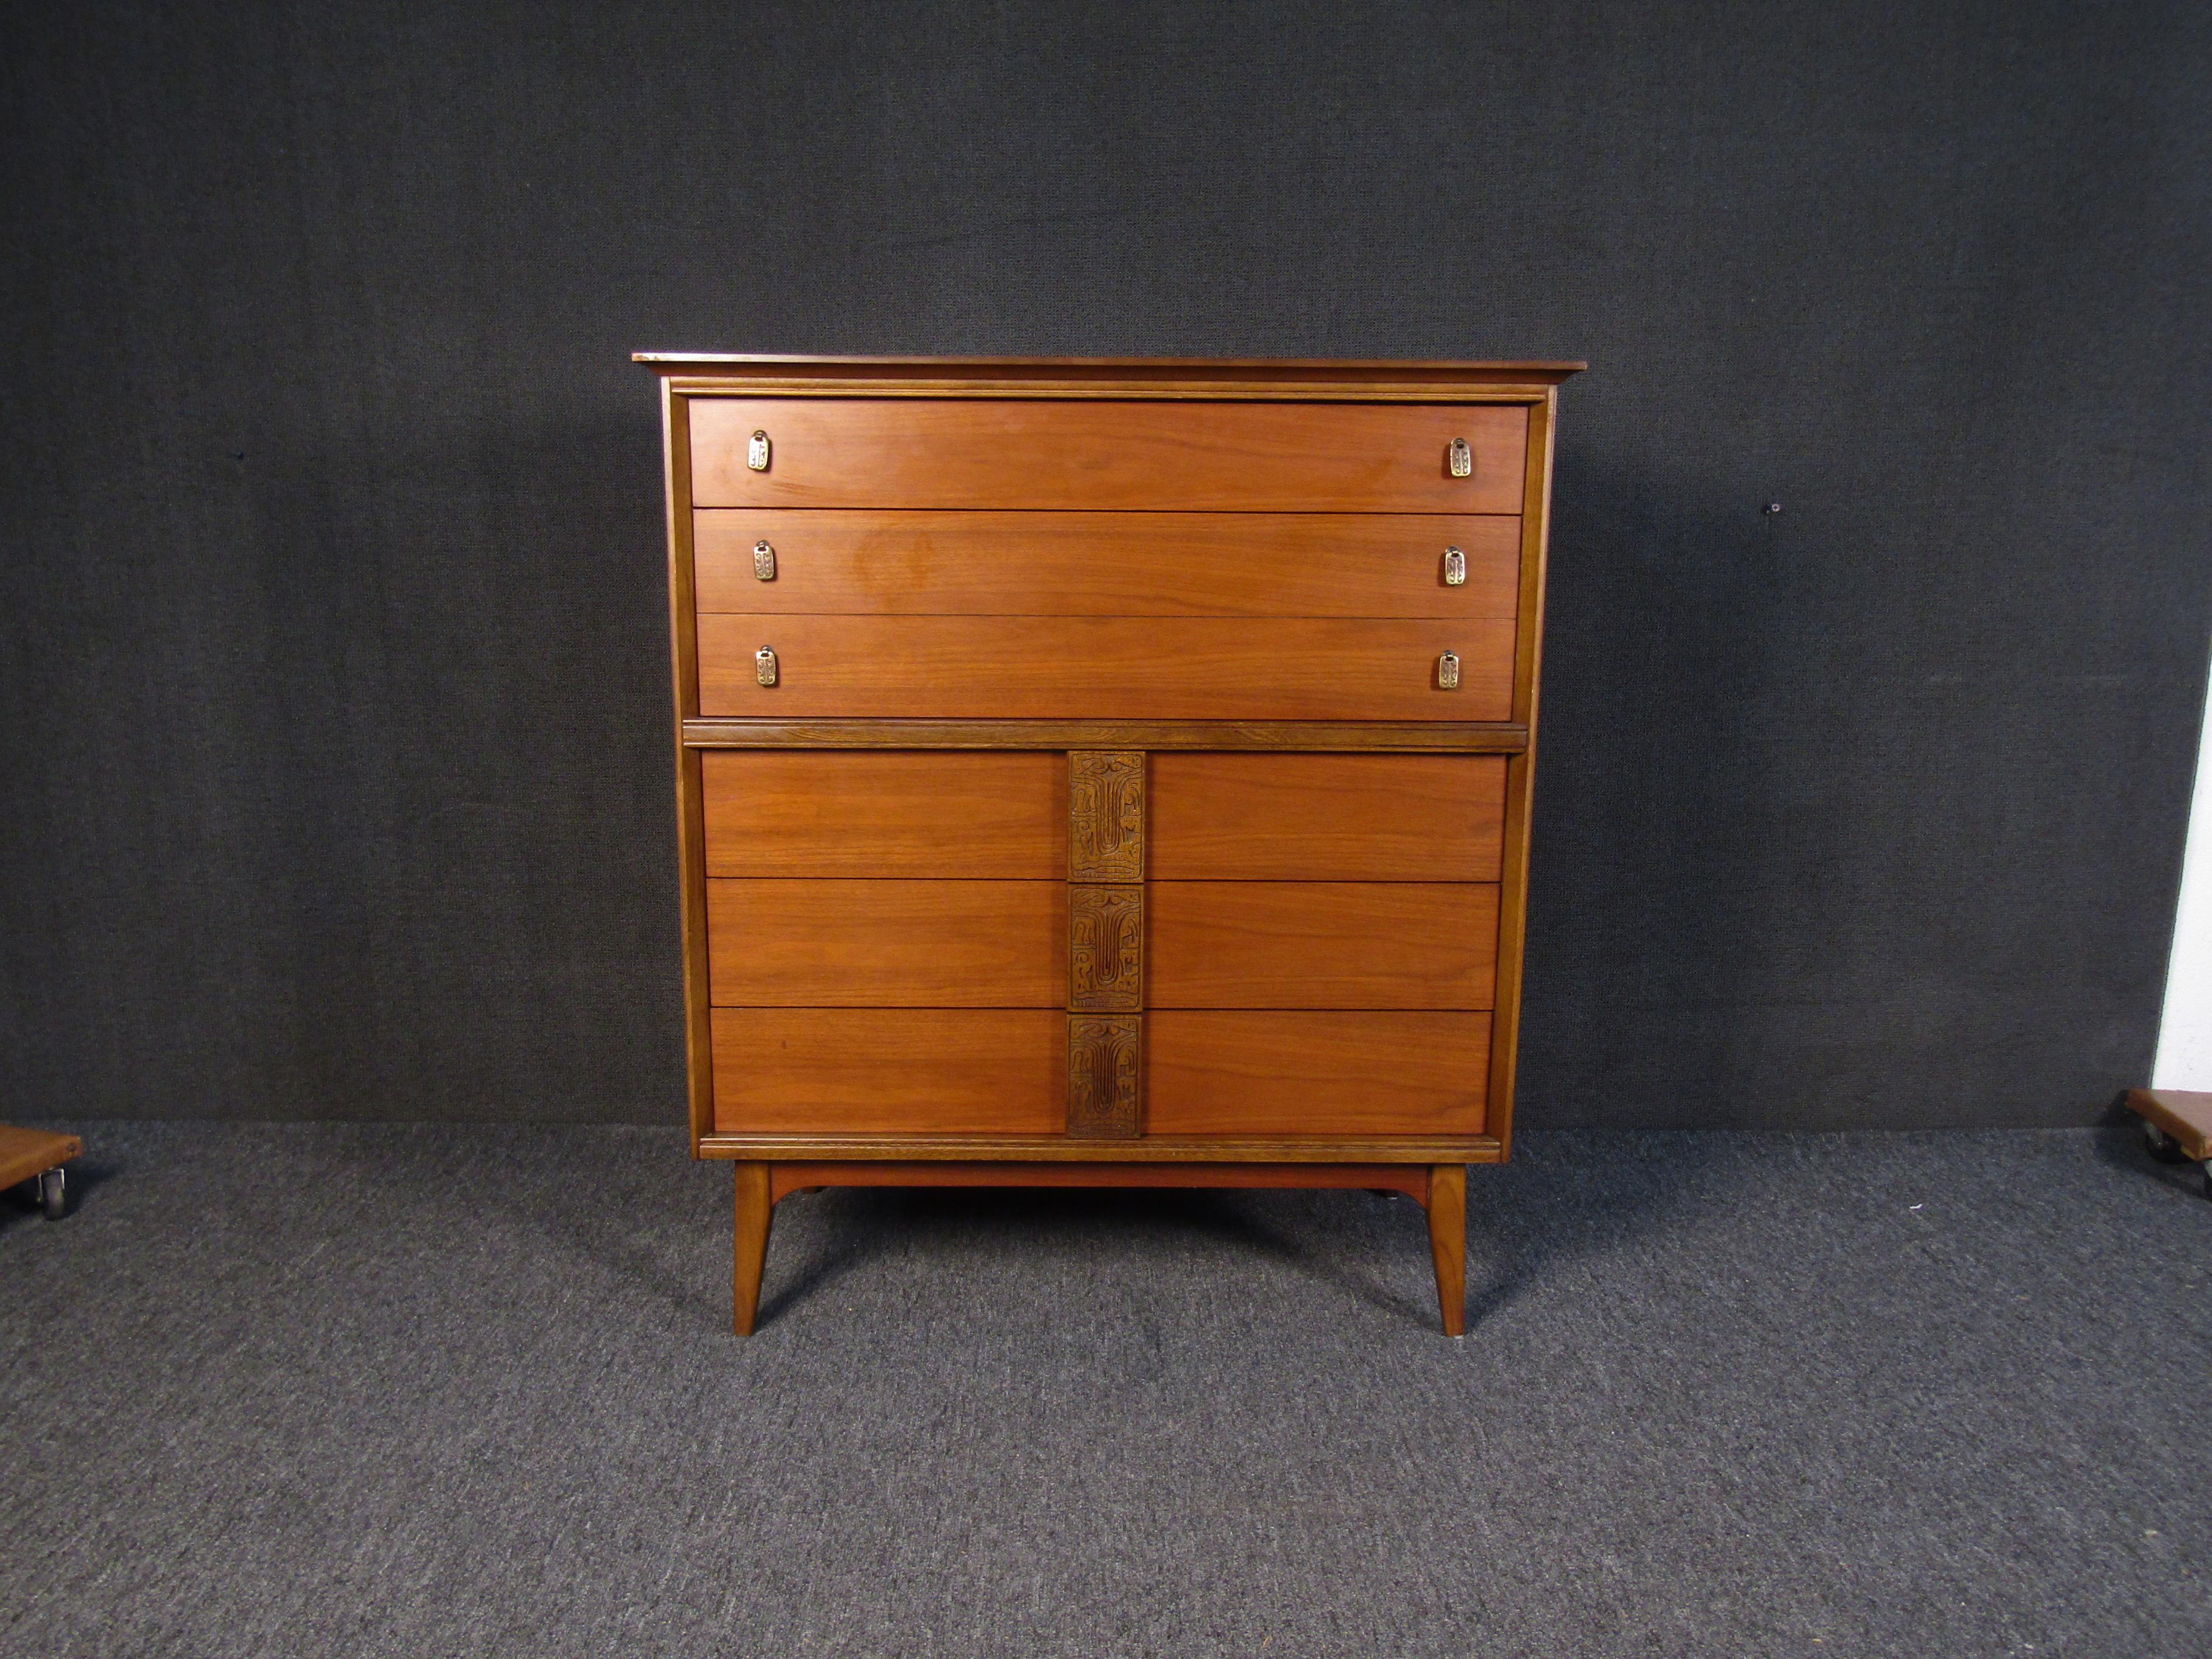 A large vintage dresser with sculpted wooden accents and metal drawer pulls. With a rich shade of walnut making this dresser attractive and versatile, it is a sure way to add Mid-Century Modern style to a bedroom. Please confirm item location with